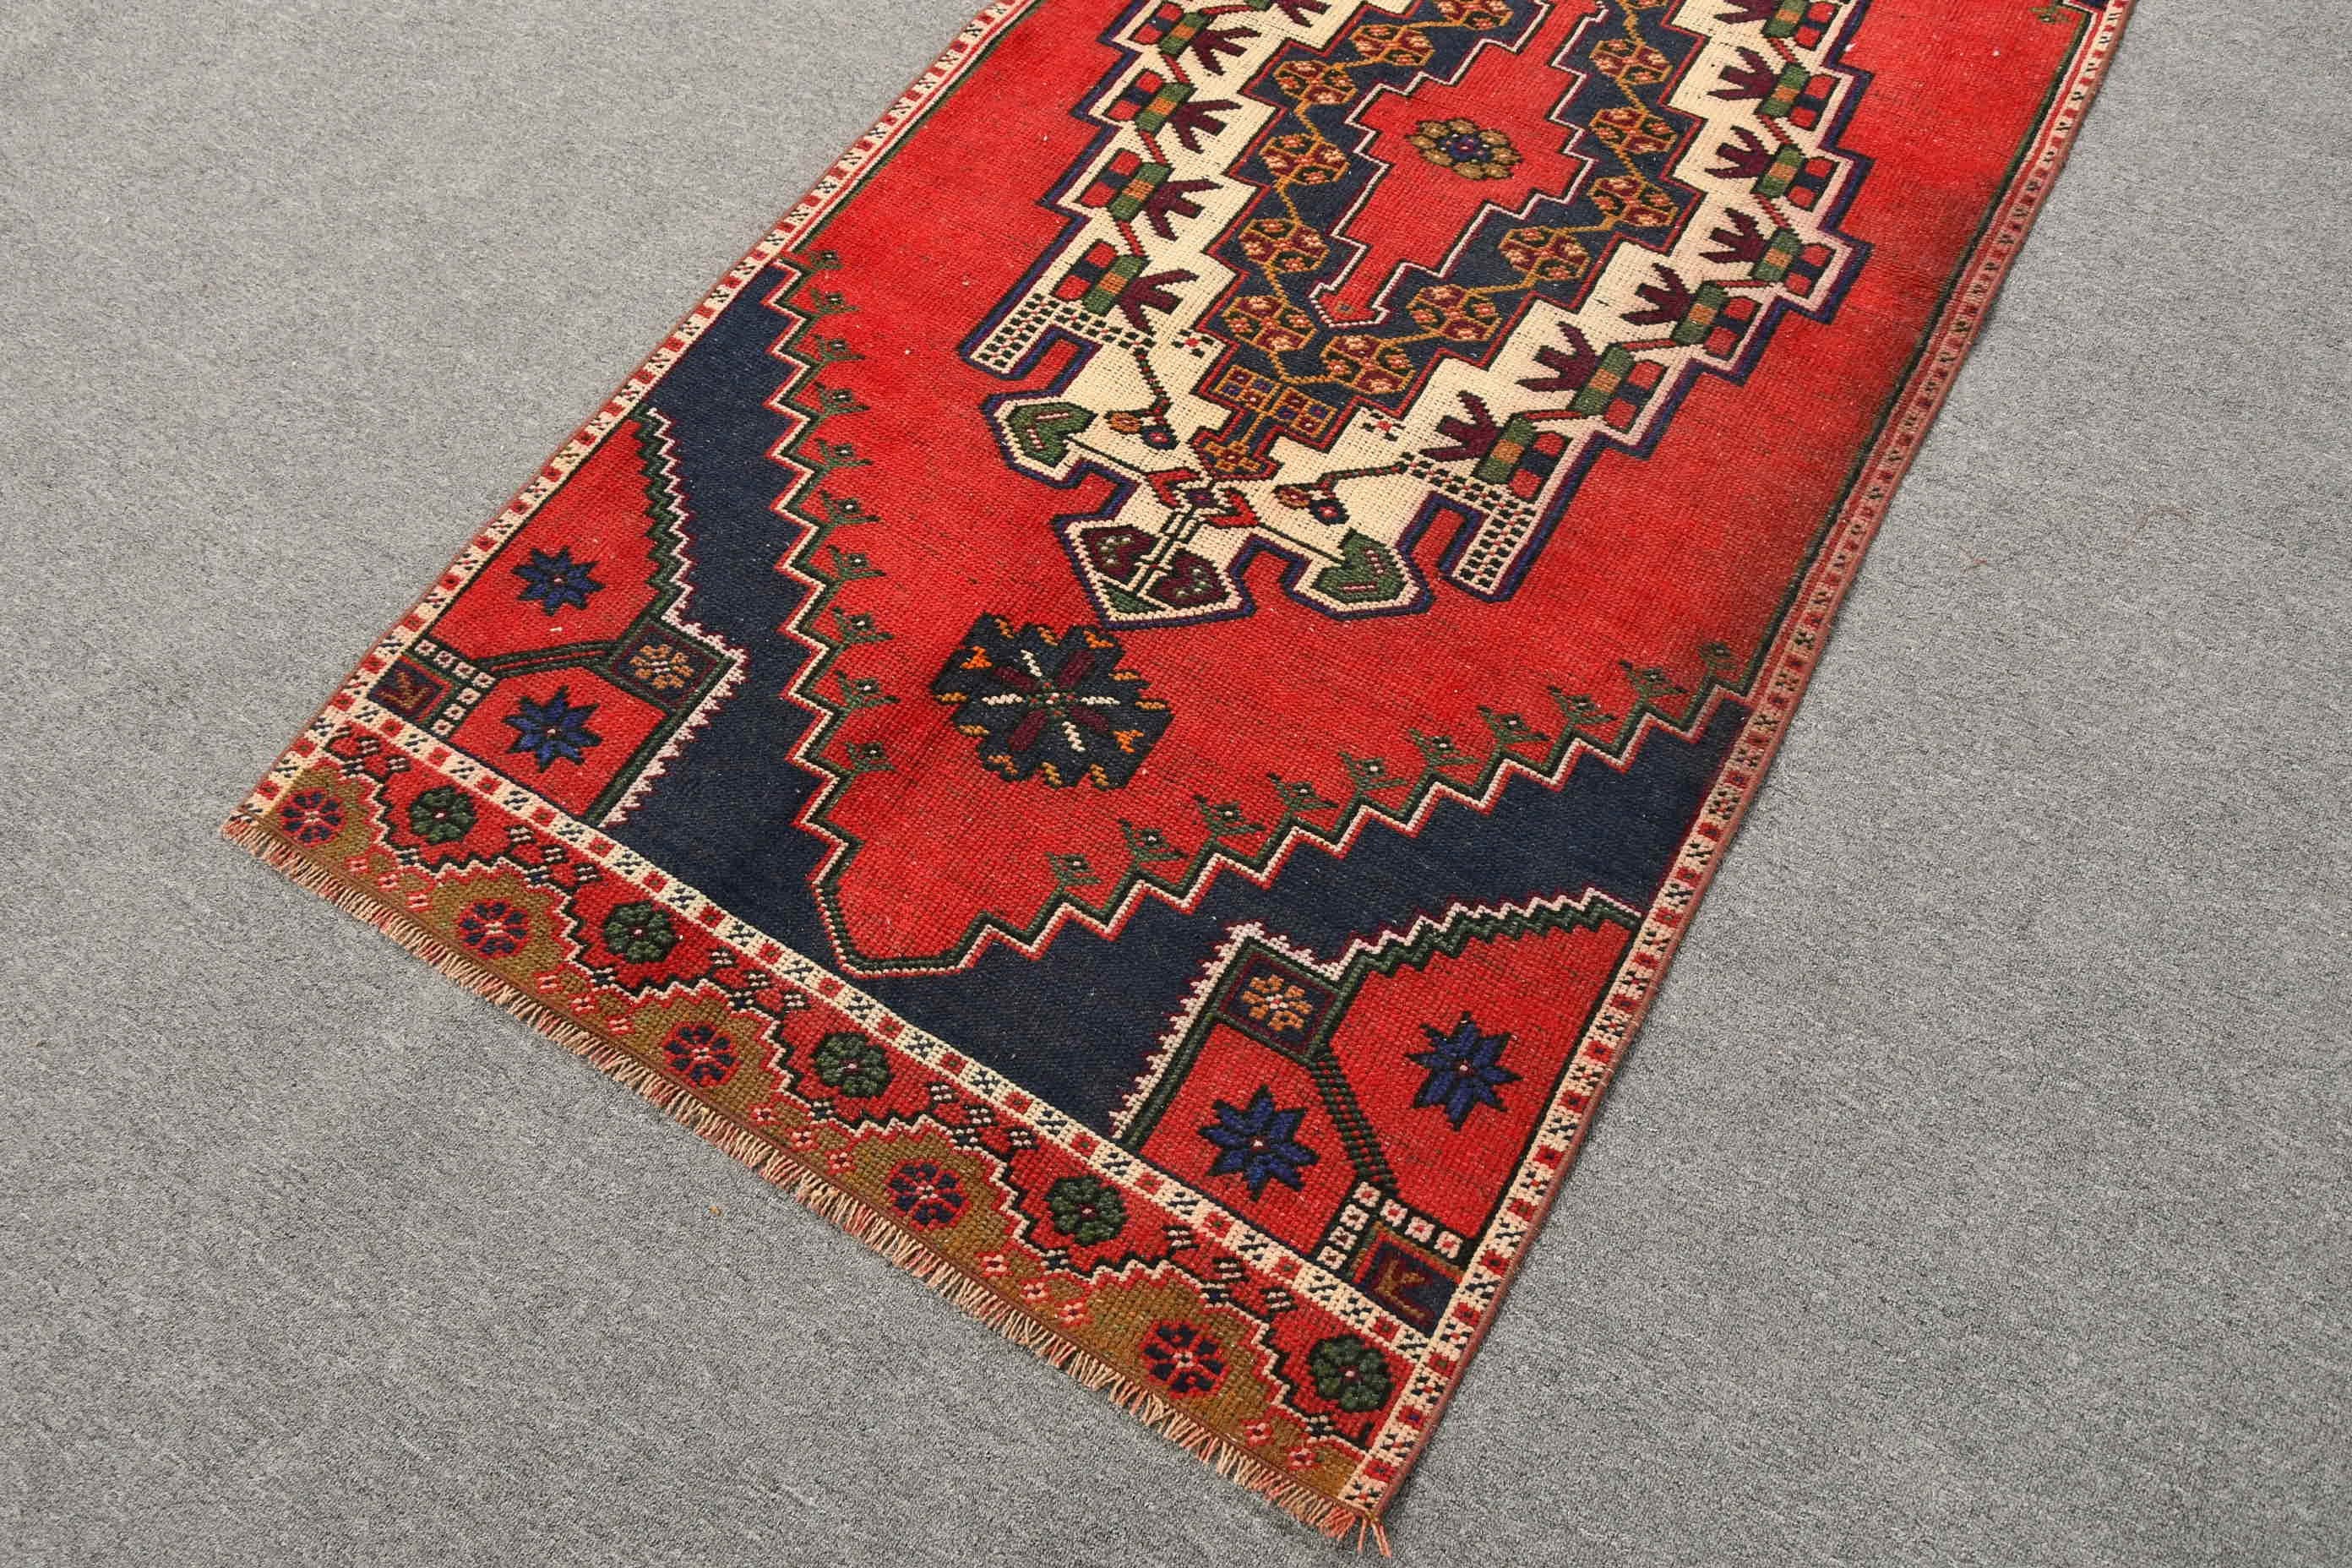 Bedroom Rugs, Kitchen Rugs, Antique Rug, Rugs for Nursery, Red Anatolian Rugs, 3.2x7.1 ft Accent Rug, Vintage Rugs, Turkish Rugs, Muted Rug